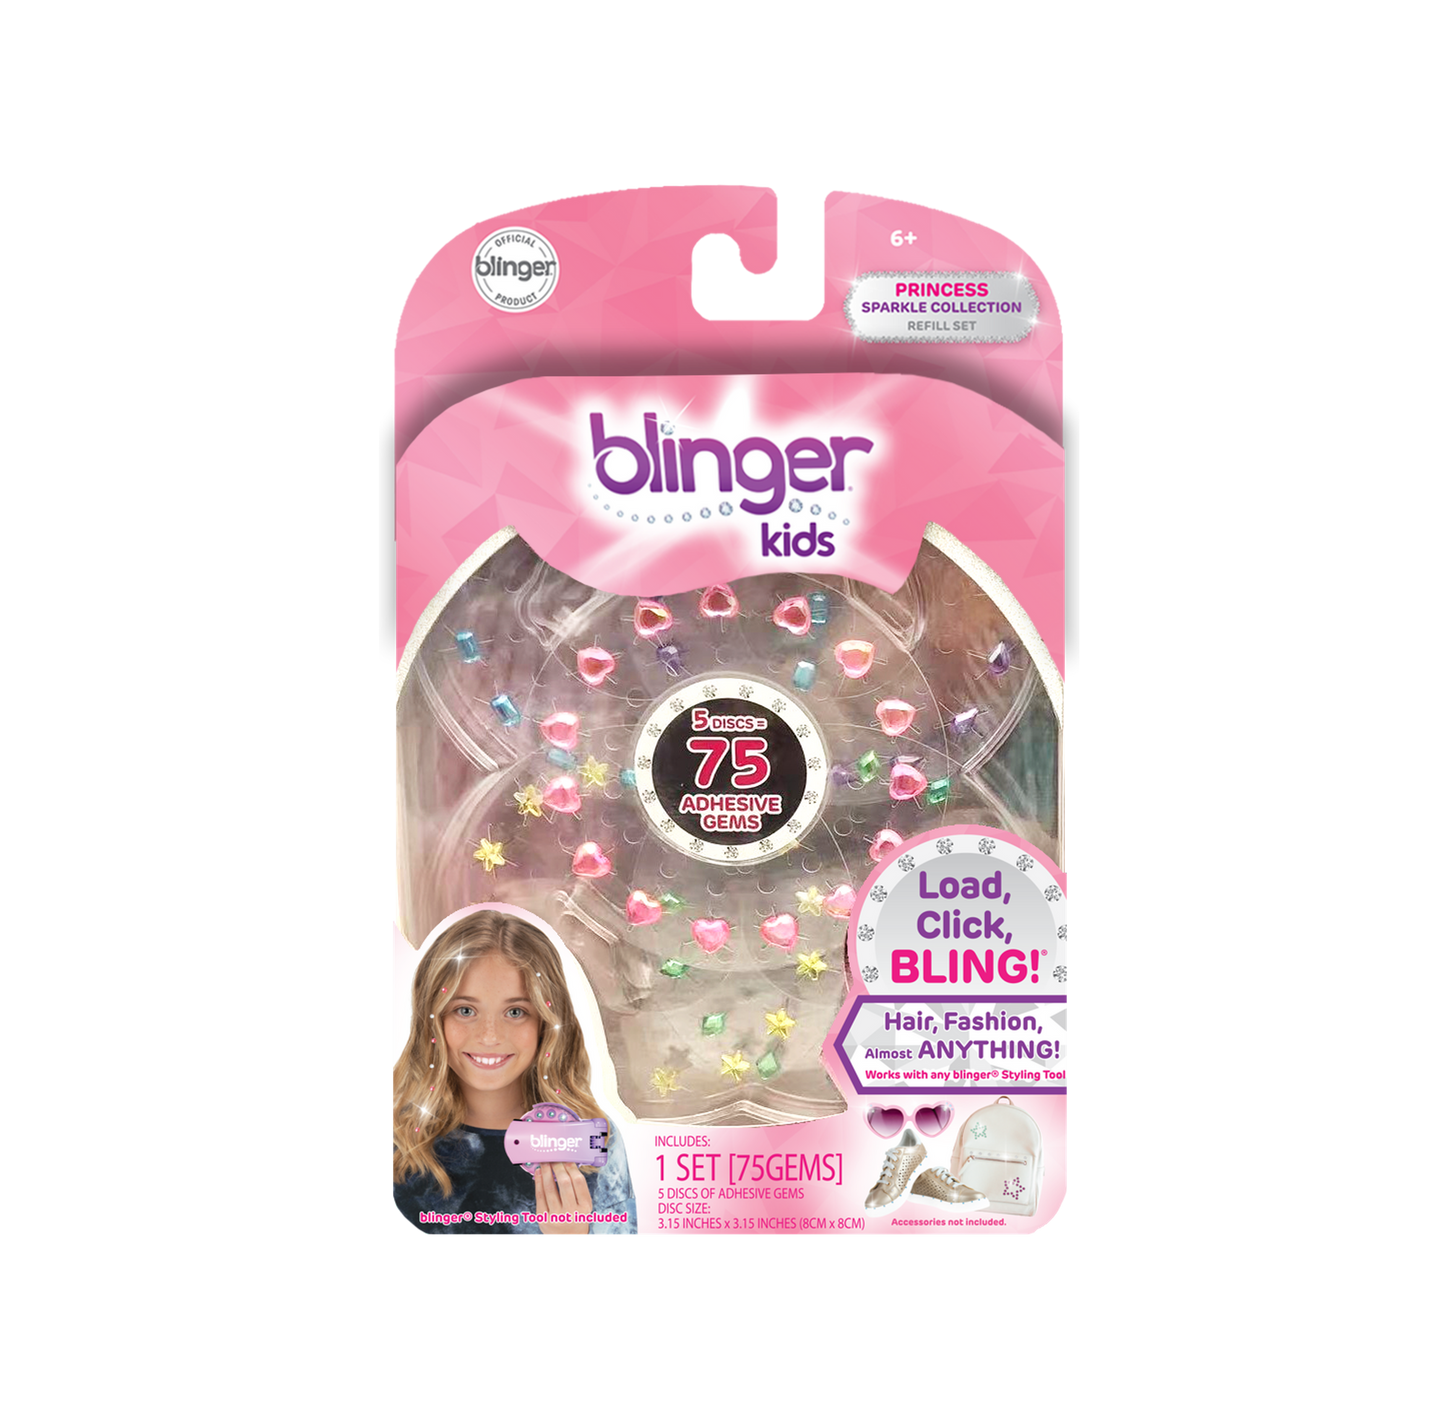 Blinger® kids Sparkle Collection Refill Pack Royal Collection